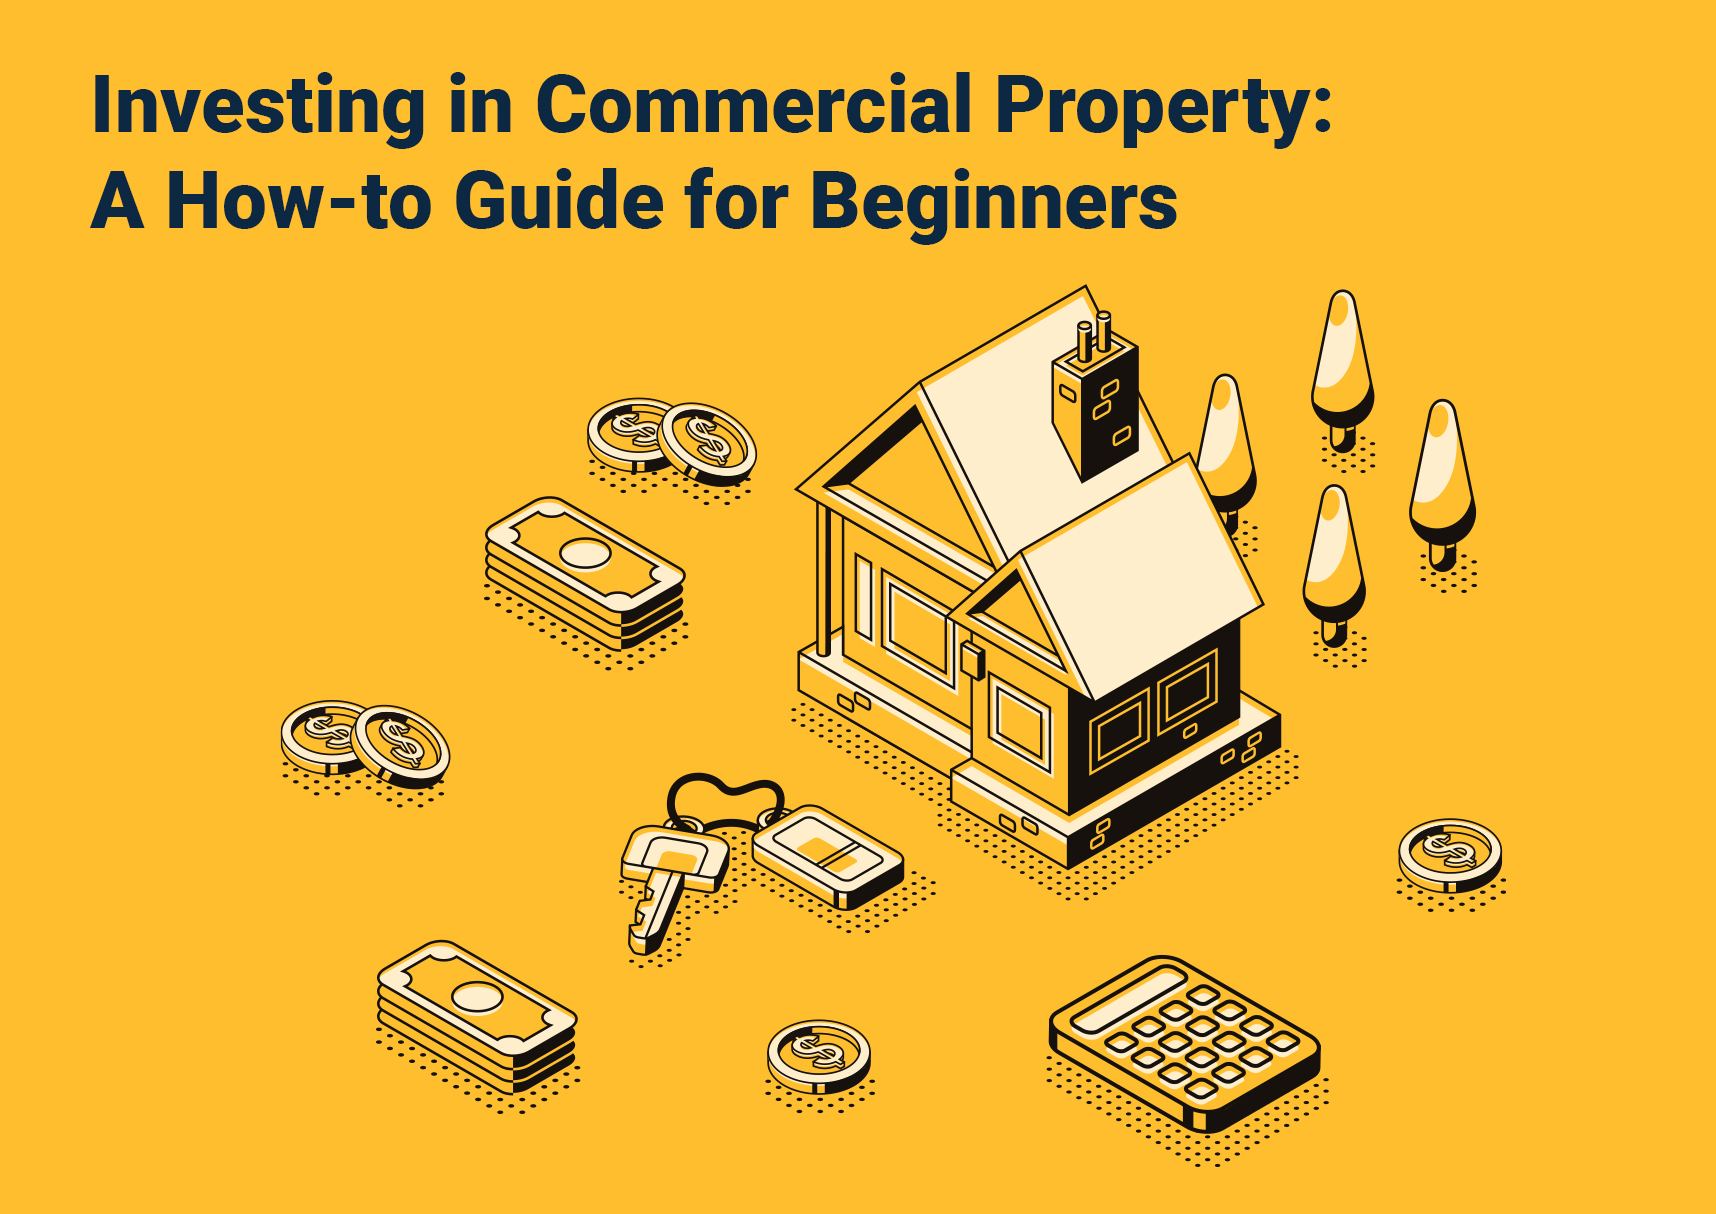 Investing in Commercial Property: A How-to Guide for Beginners